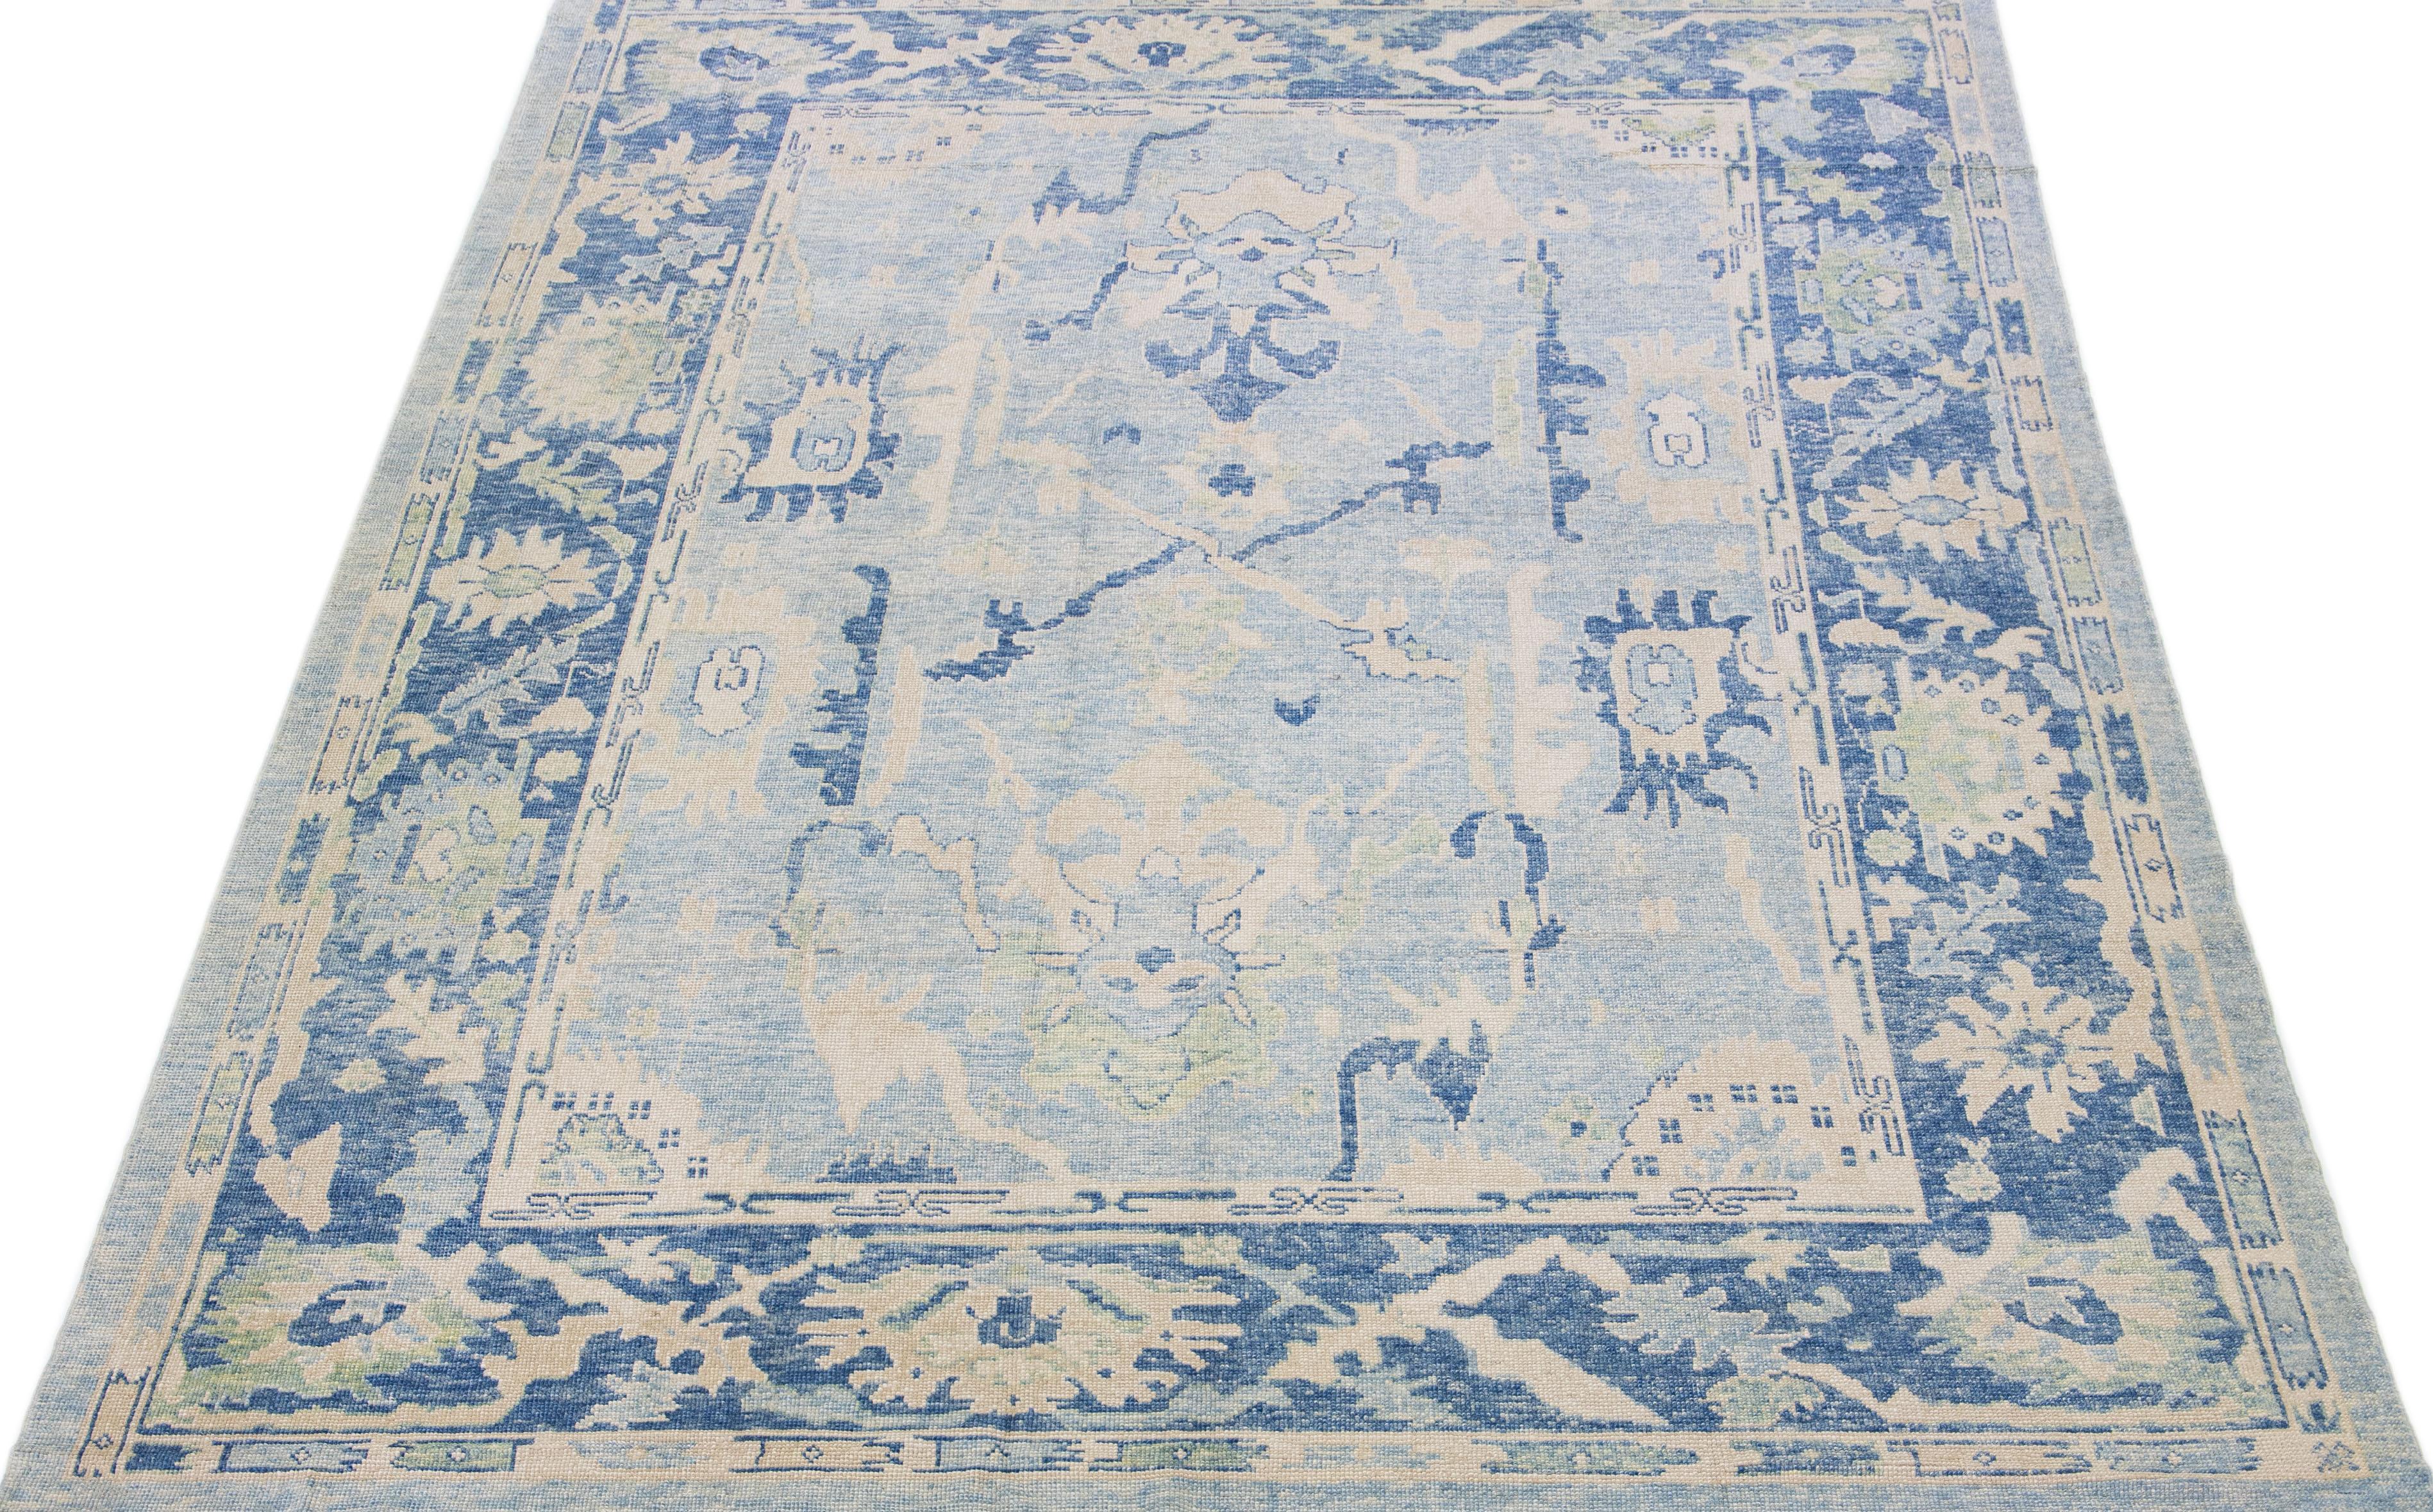 Beautiful modern Oushak hand-knotted wool rug with a light blue color field. This Turkish Piece has beige and green accent colors in a gorgeous all-over floral design.

This rug measures: 10'1